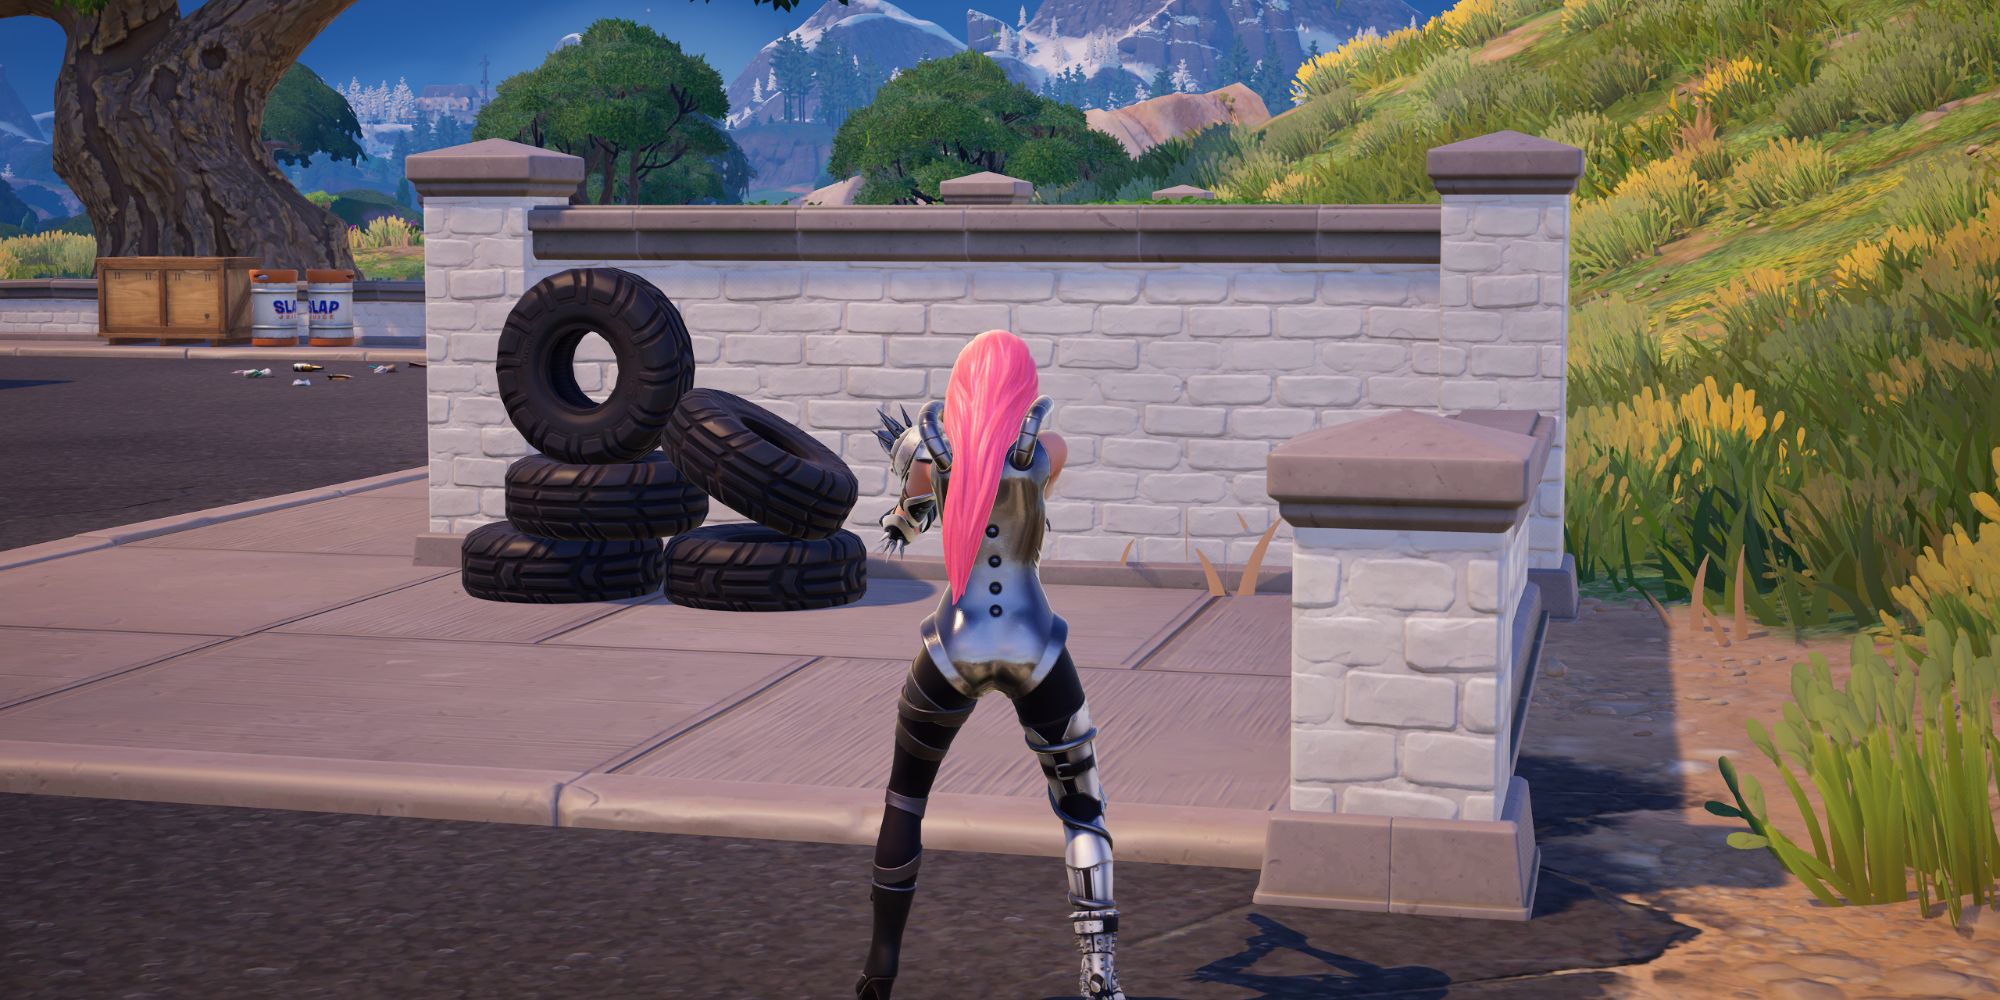 An image from Fortnite of the playable character looking at a pile of tires at a gas station.